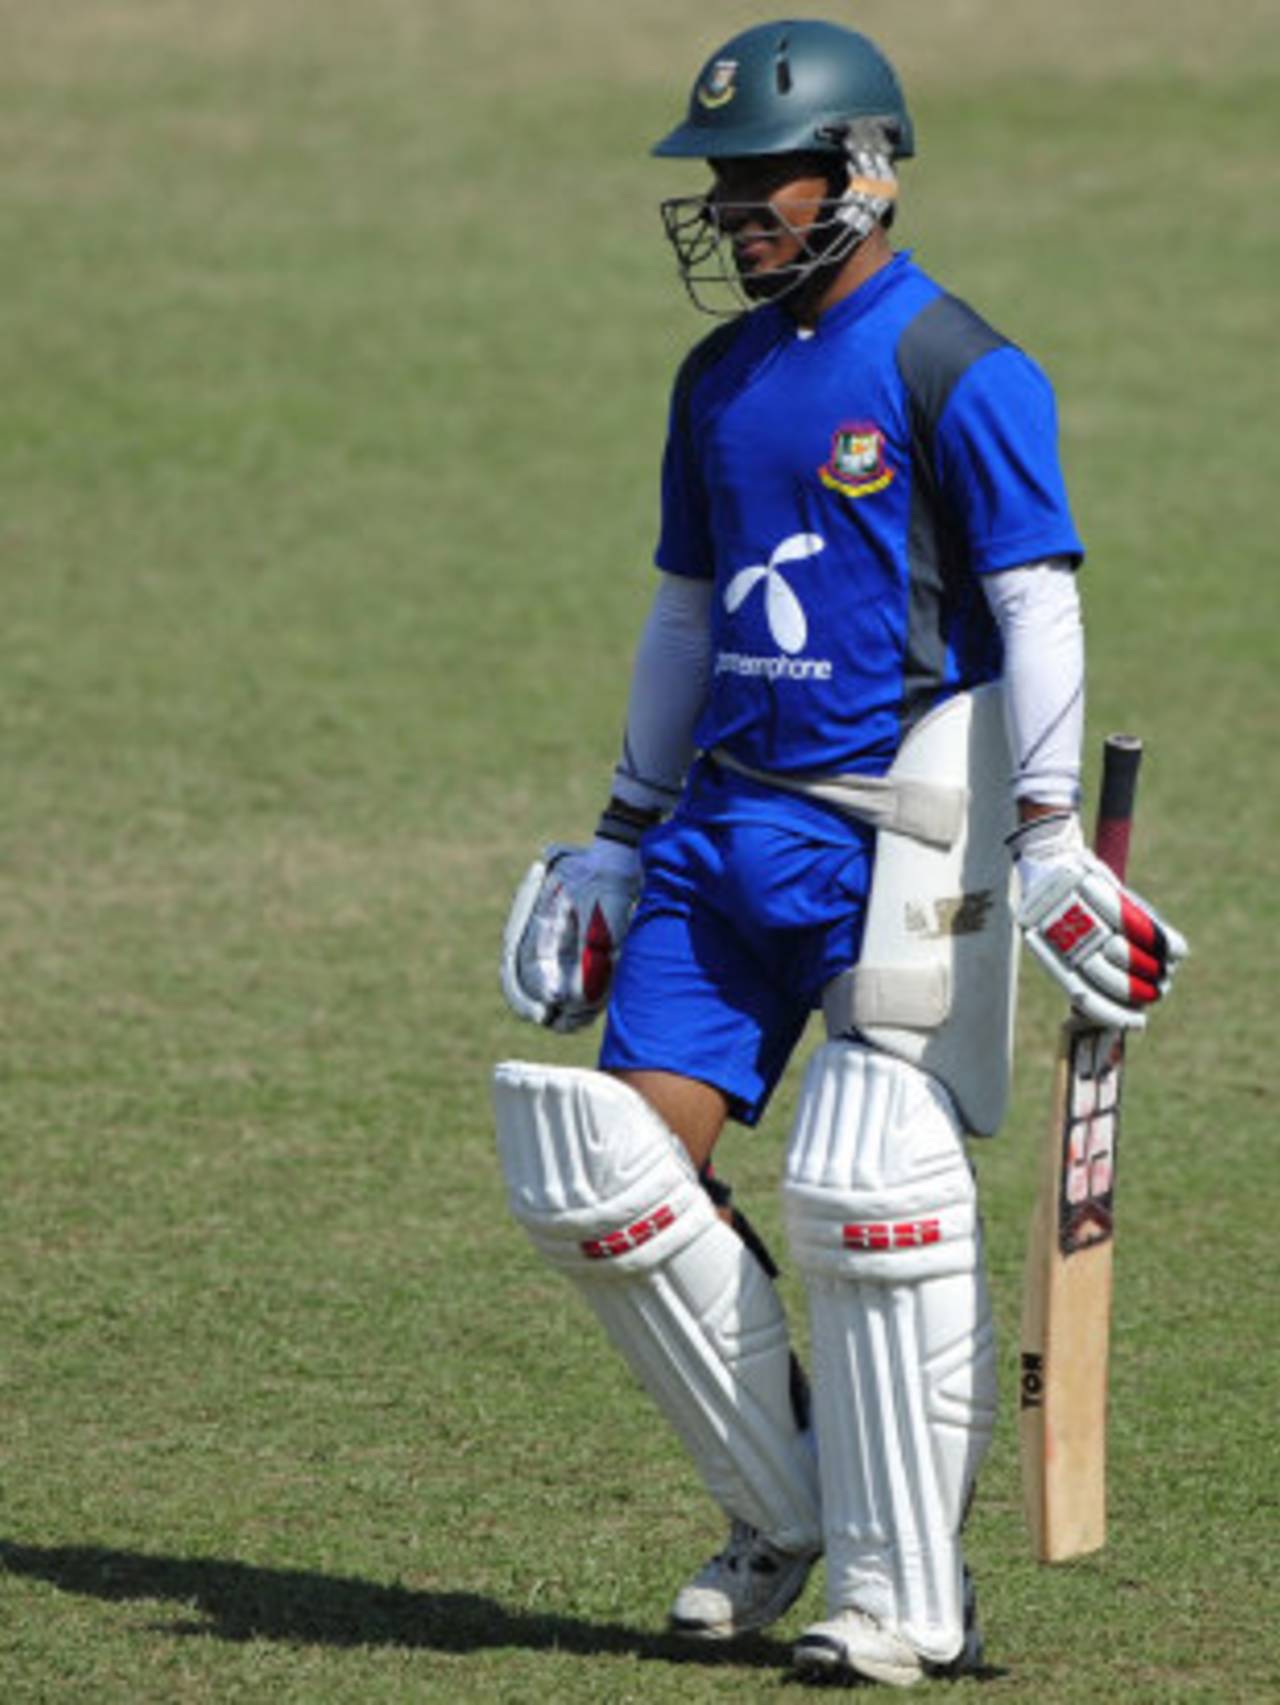 Mohammad Ashraful during a practice session, Chittagong, December 8, 2011 